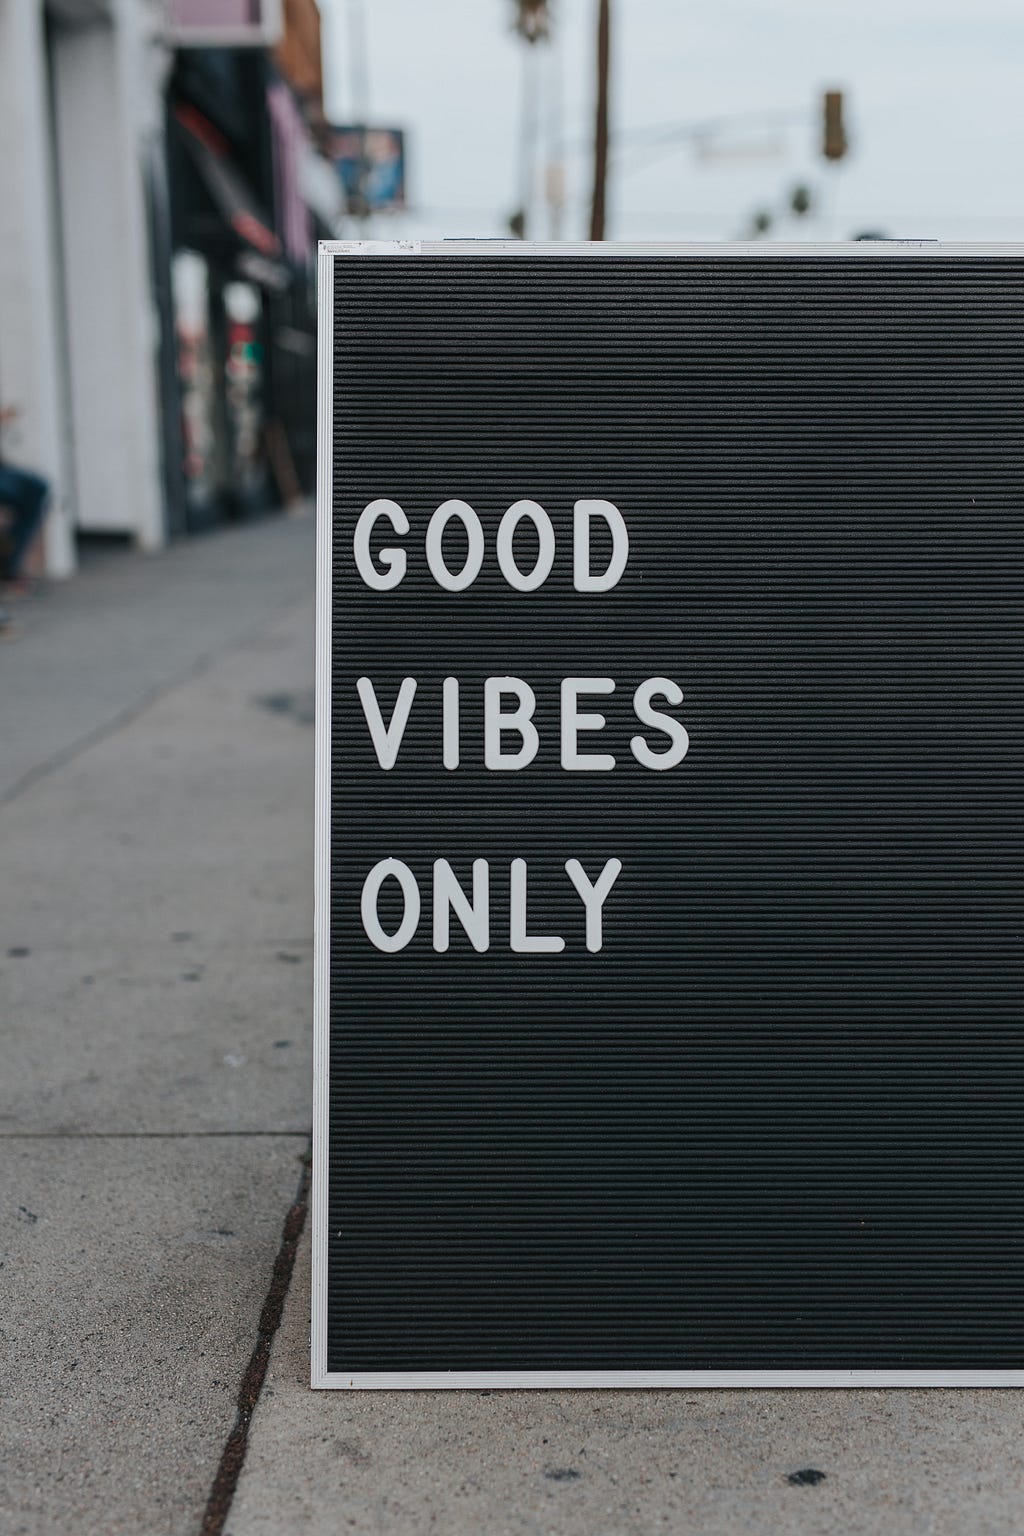 Good Vibes are crucial for a successful life